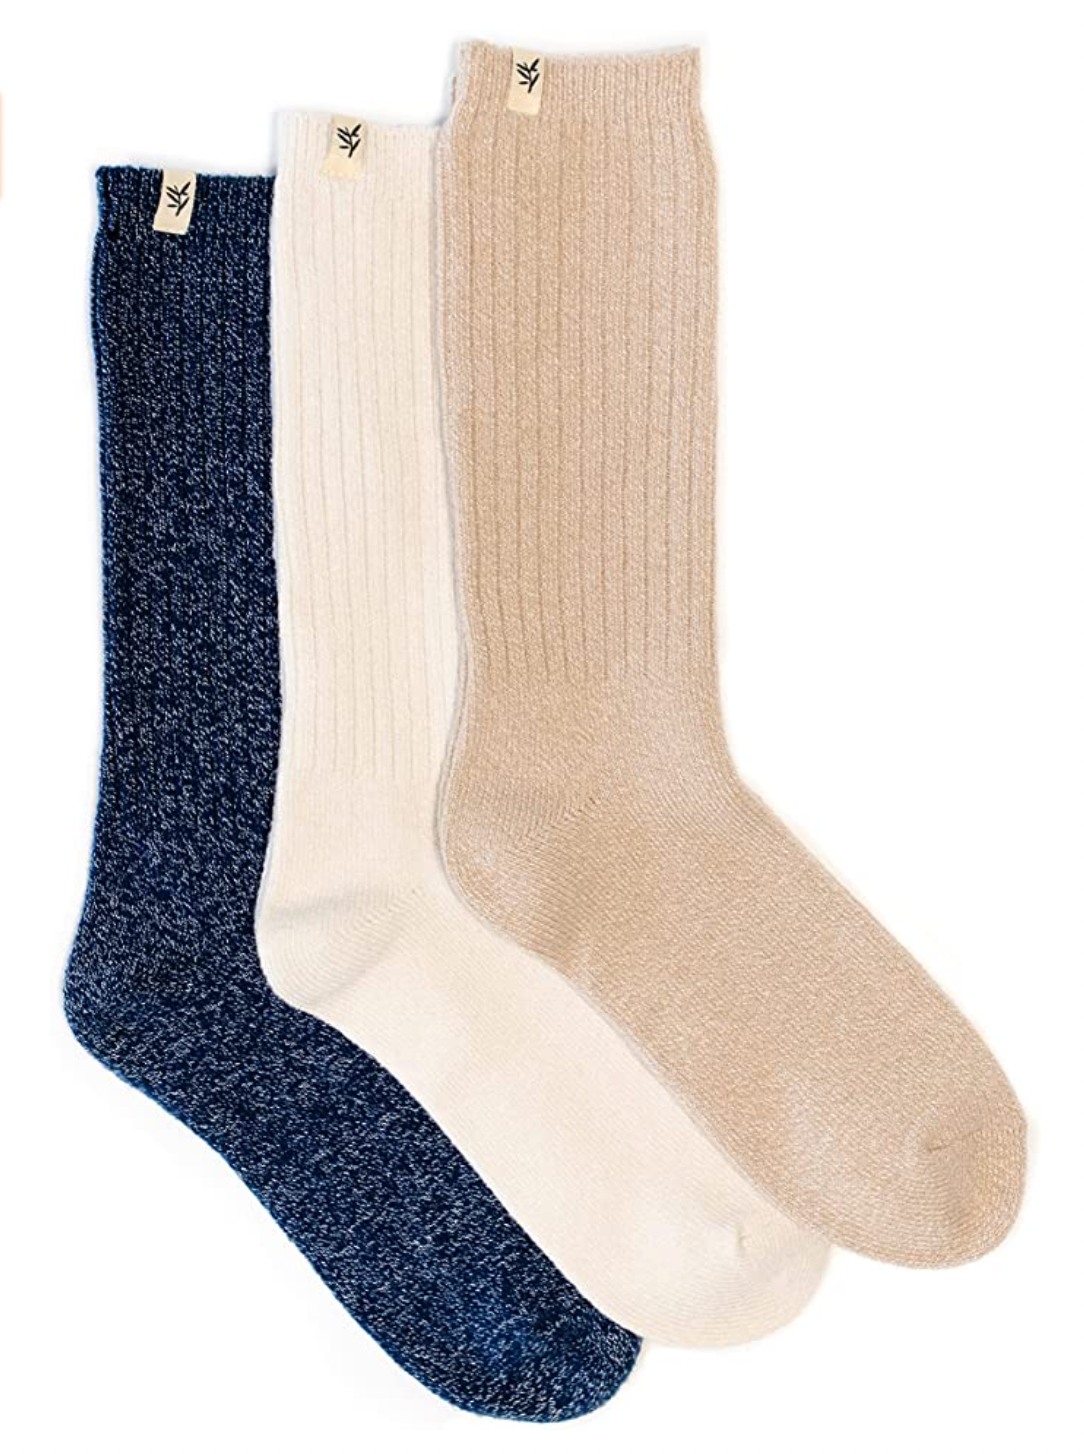 1pair Women's Cashmere Wool No-shedding Soft & Warm Floor Socks For Autumn  And Winter, Toe Socks Style